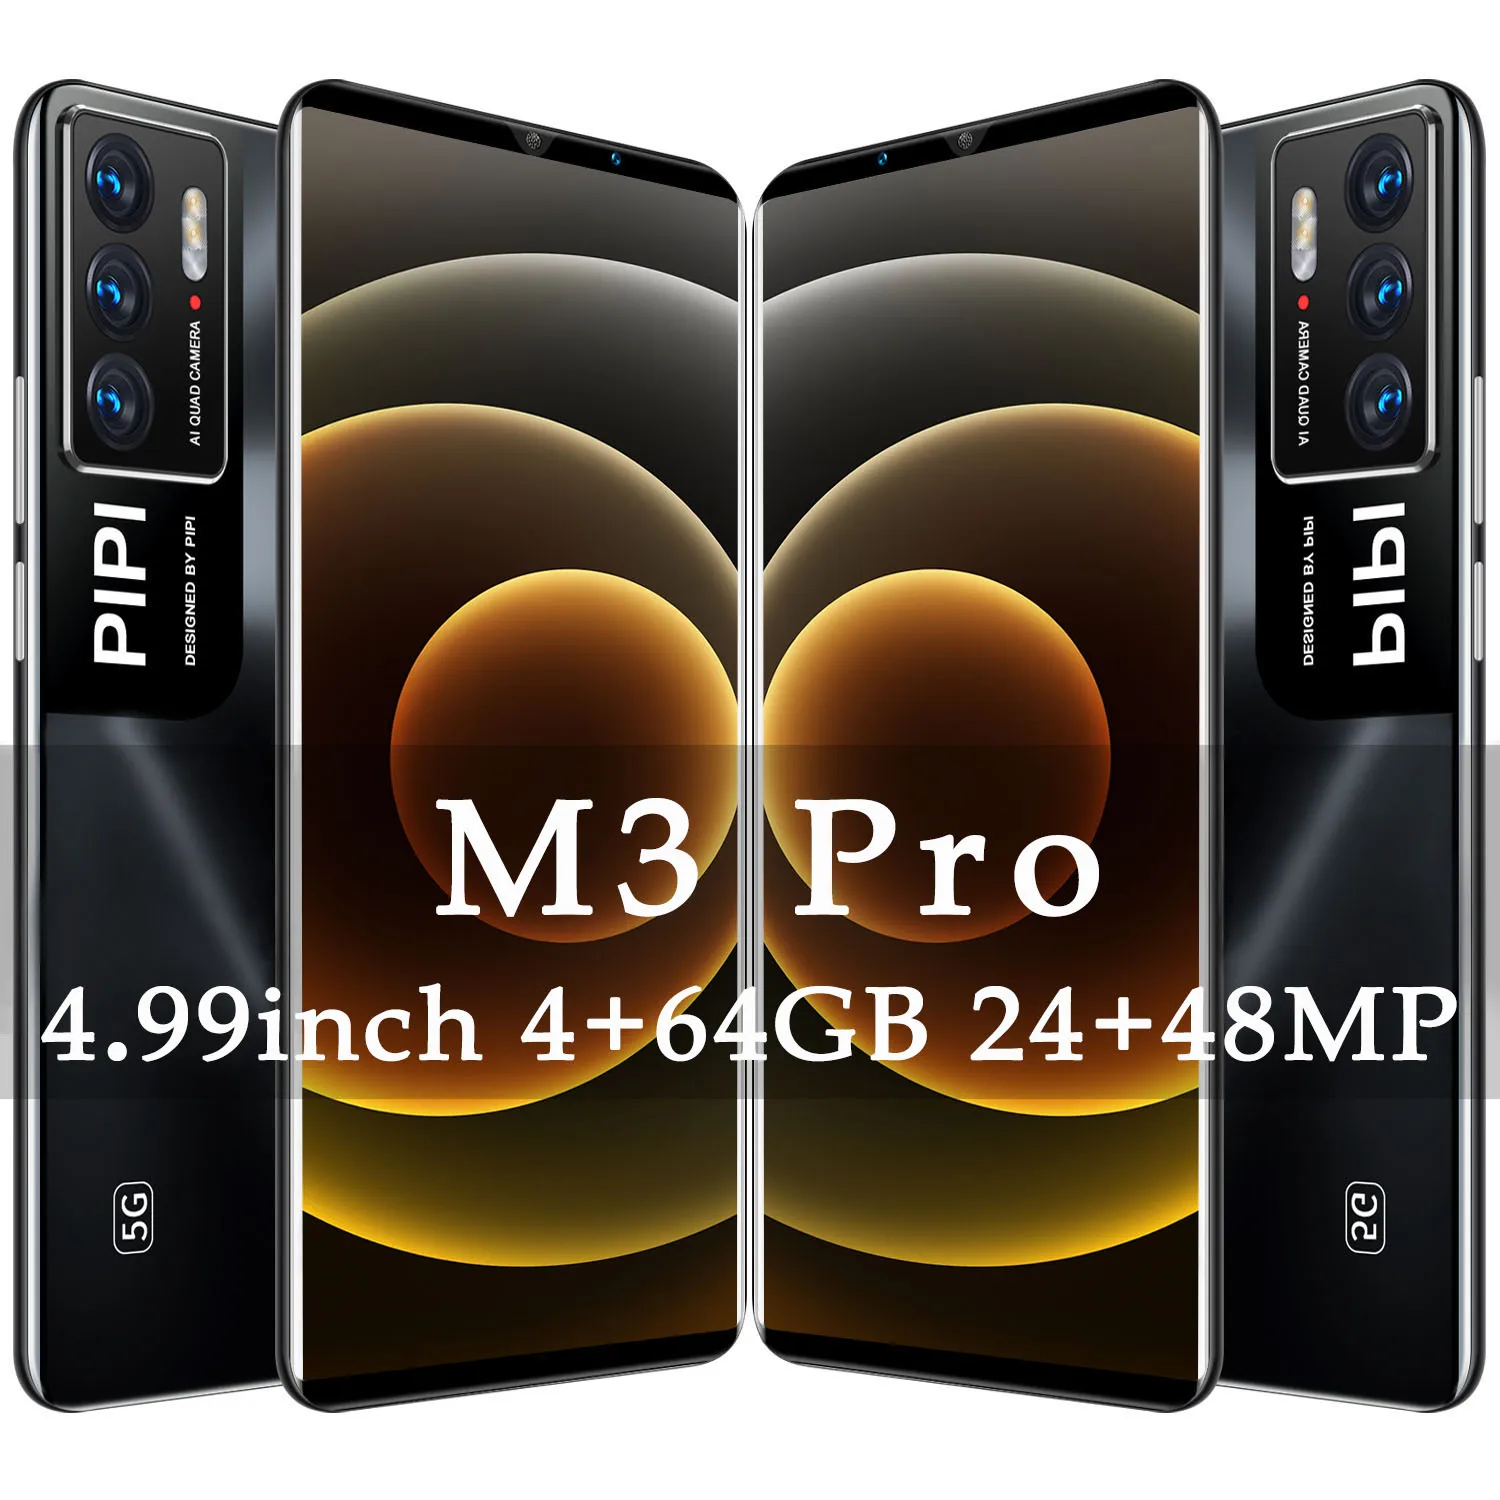 2022 M3 Pro 4.99 inch Global Smartphone 10 Core 4+64GB 24+48MP Full Screen Dual SIM Cell Phone Cellular 5G Network Smartphone